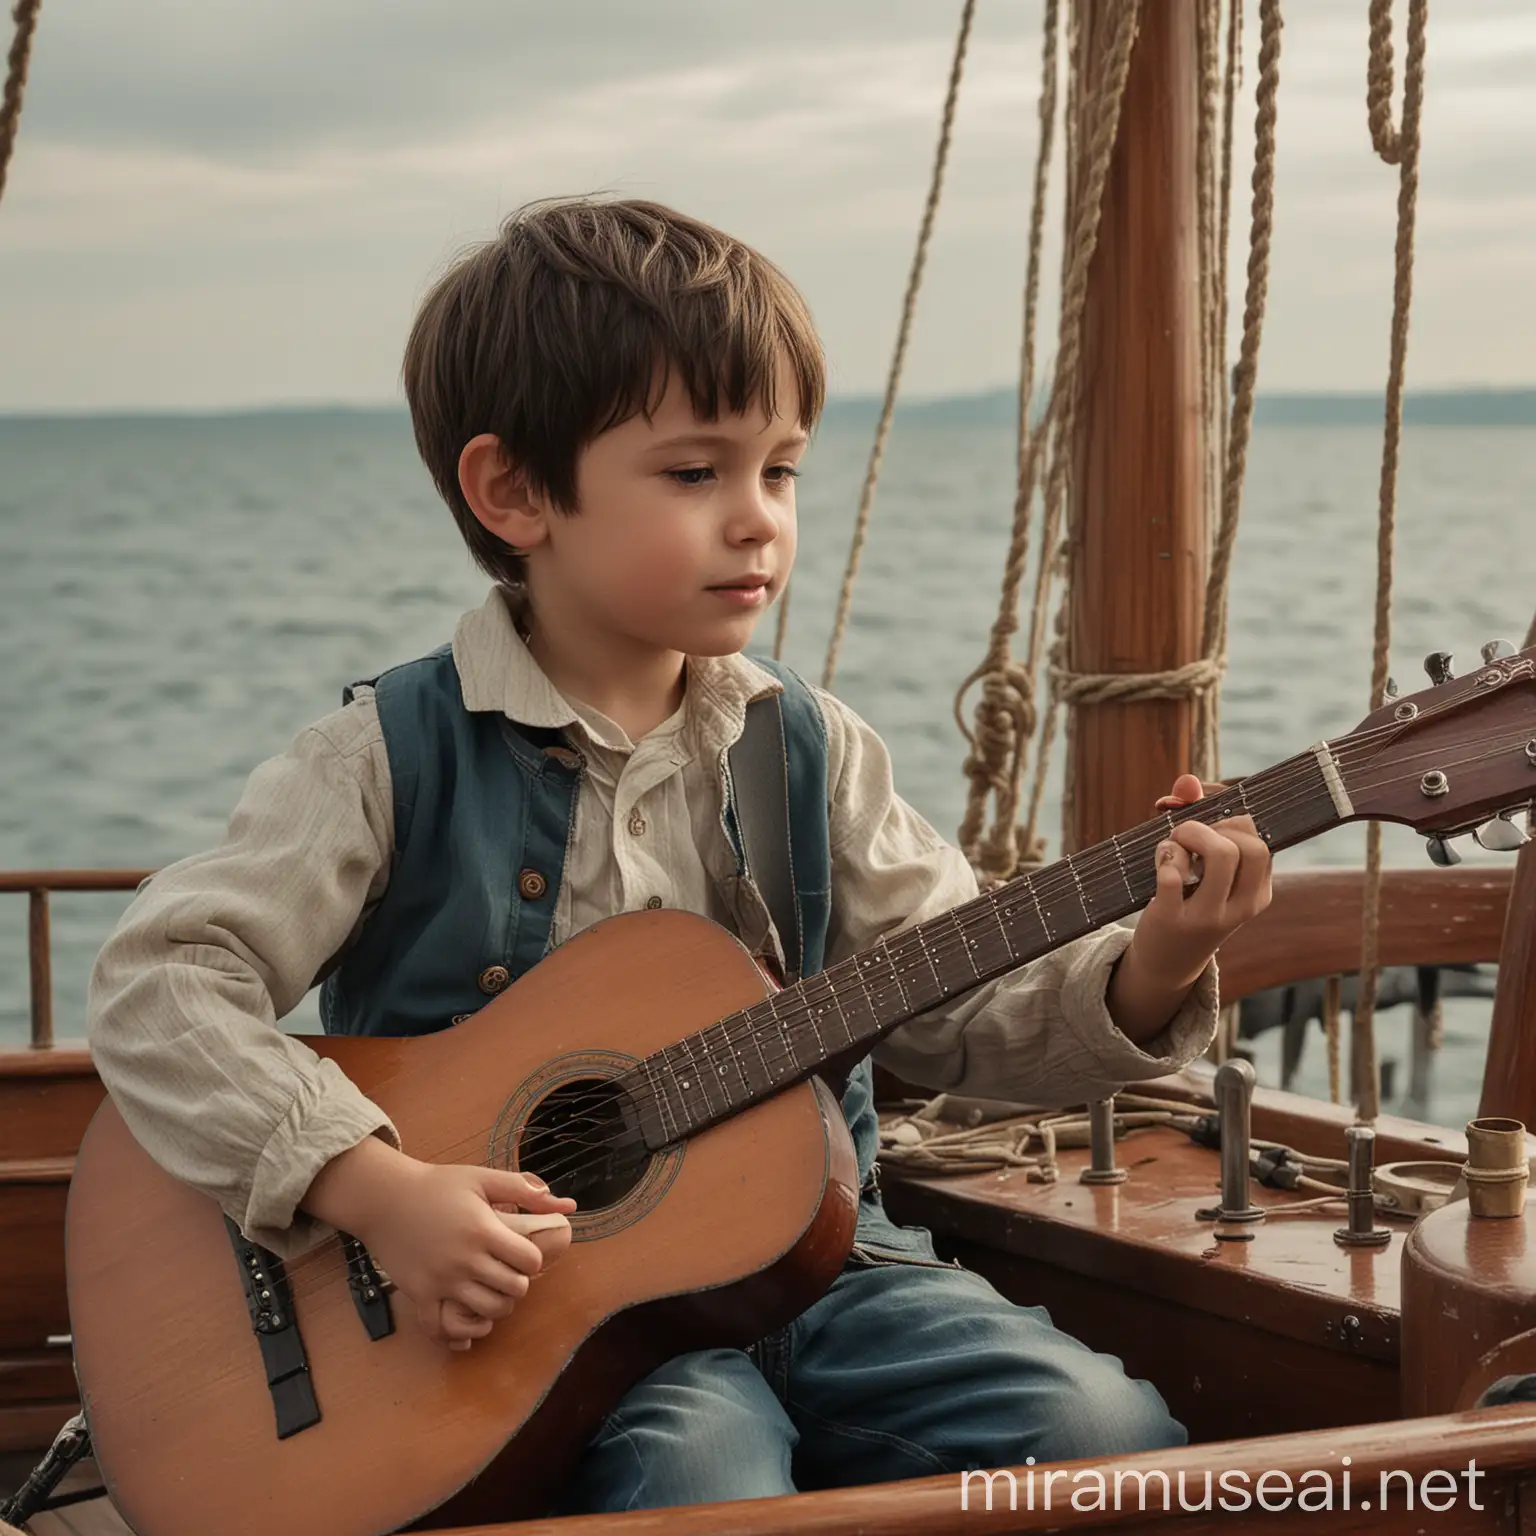 A little boy playing guitar in a a ship